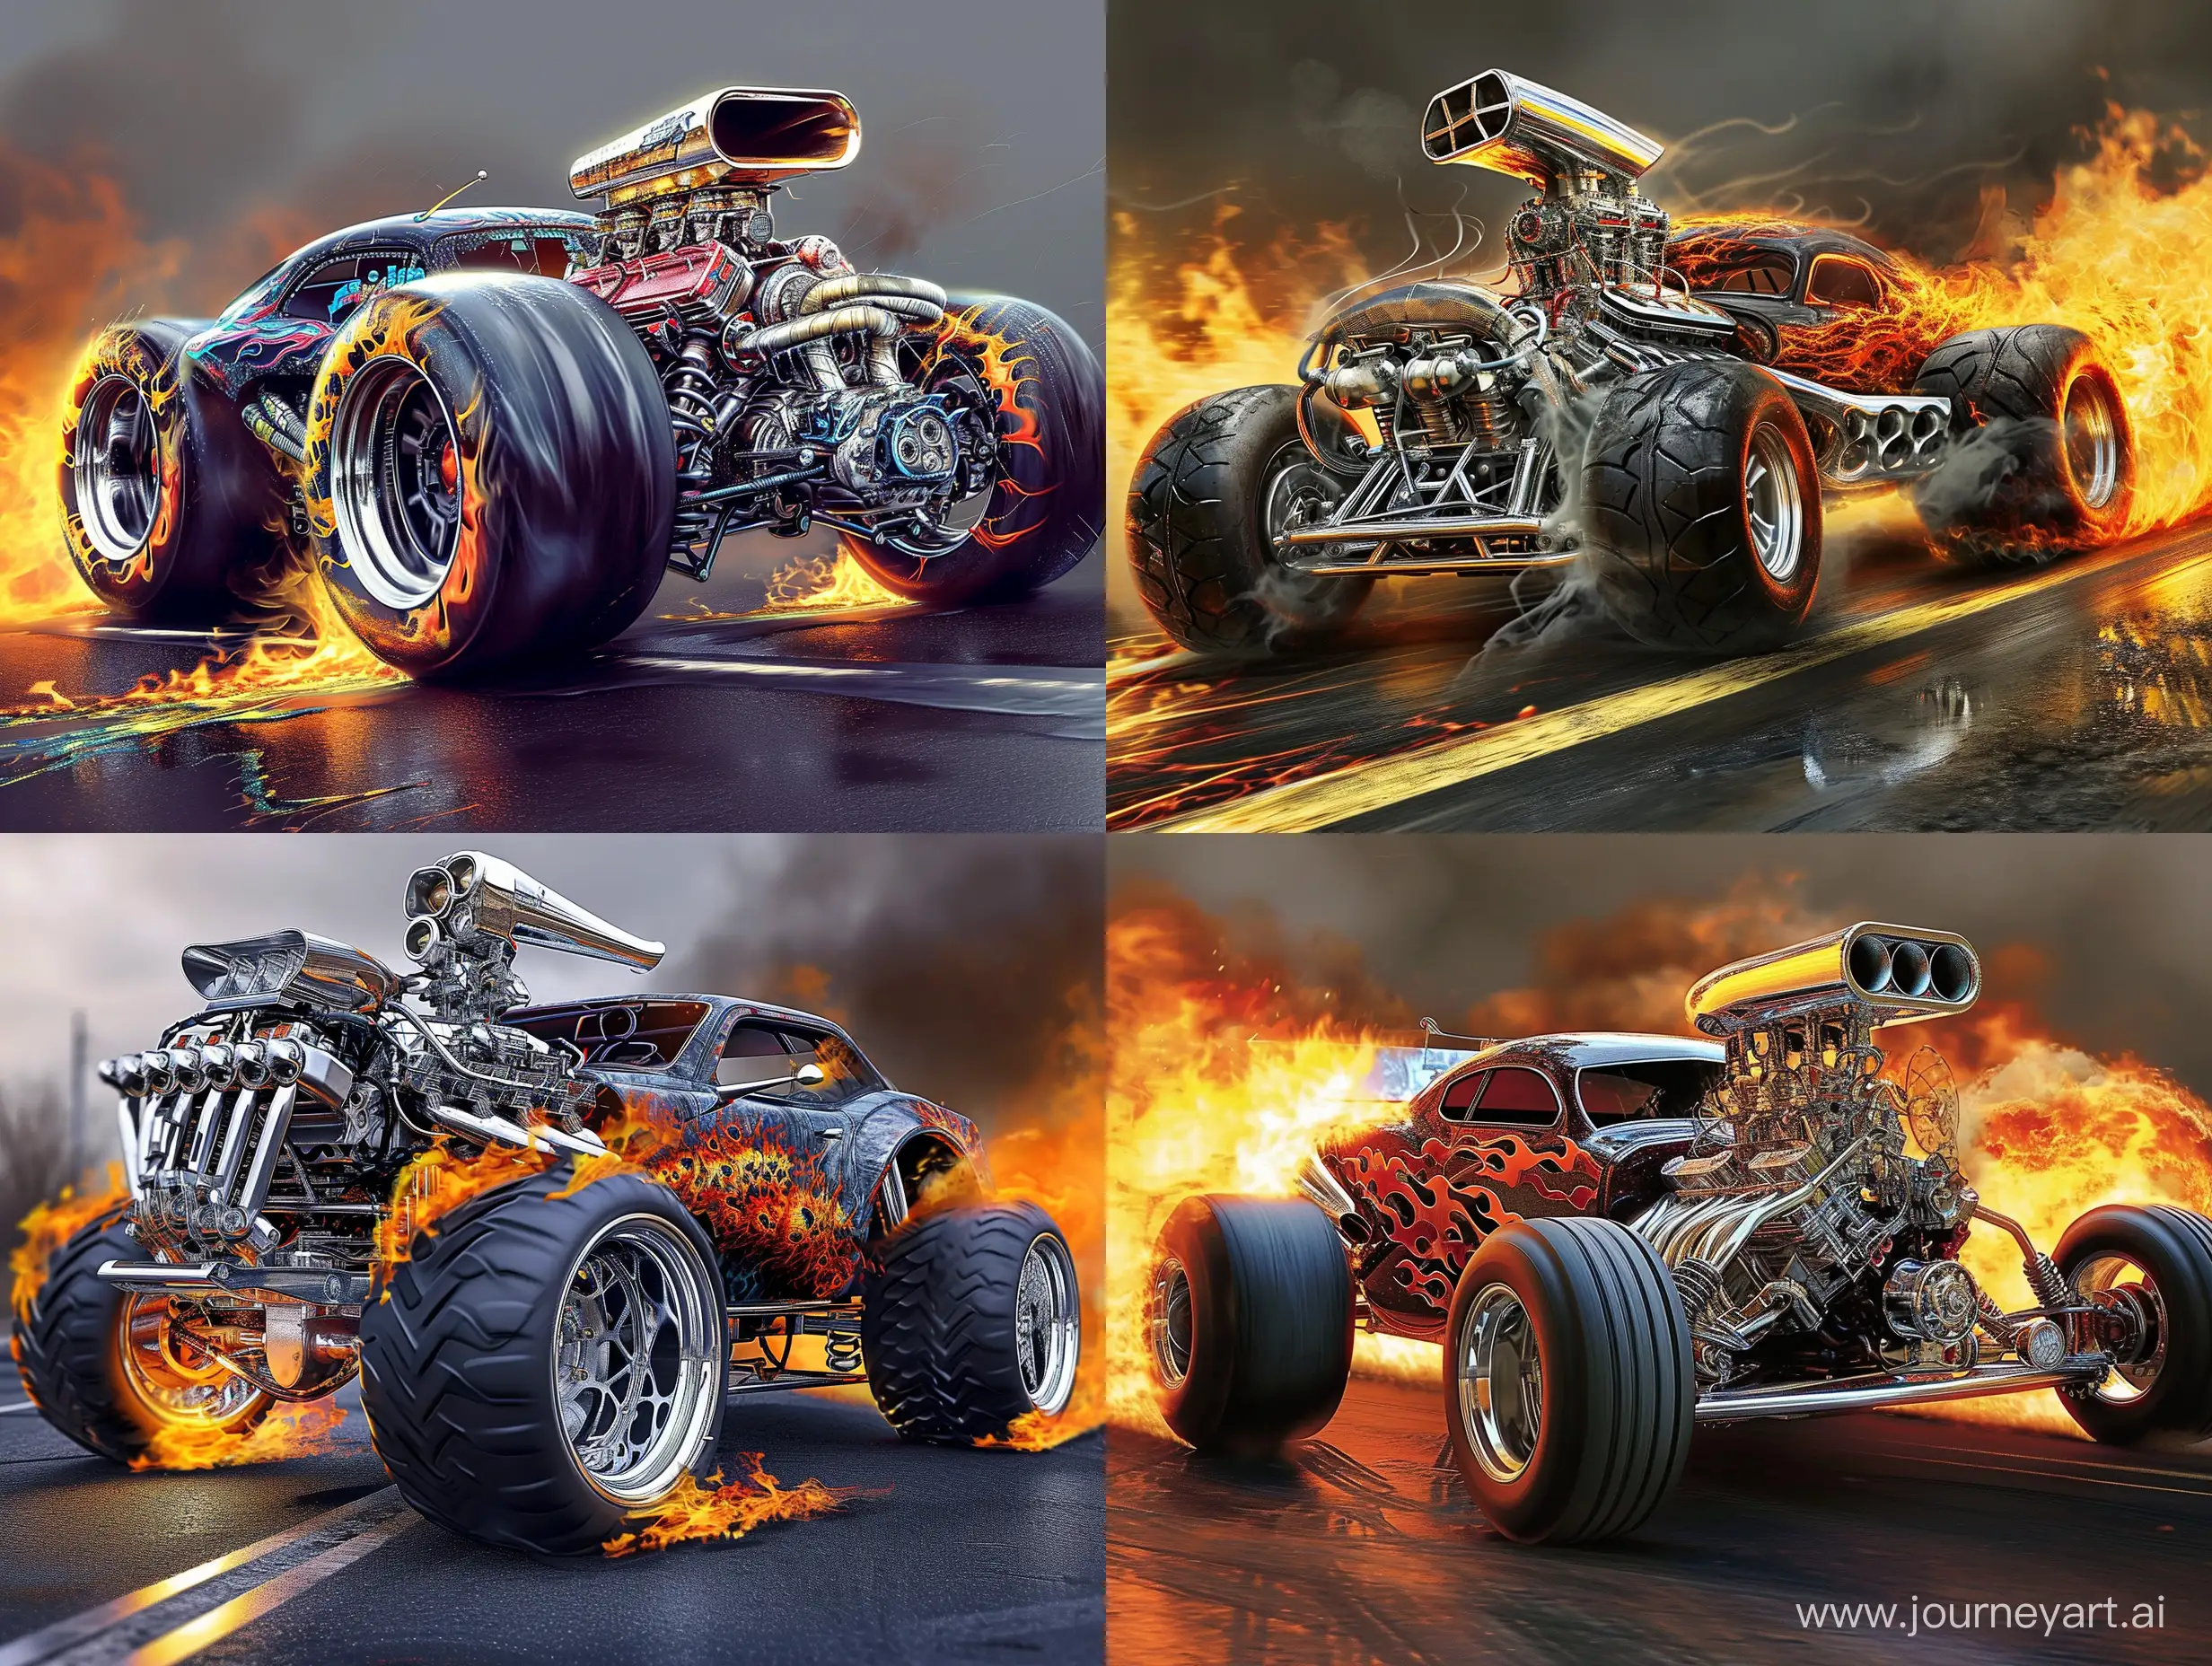 An extreme sports car. It has an elaborate custom, fire, chrome, and black auto design.  The engine is oversized, and has a chrome, overhead air breather, extruding from the front hood. The suspension is supported by monster truck tires with chrome rims. The road and the vehicle are on fire.